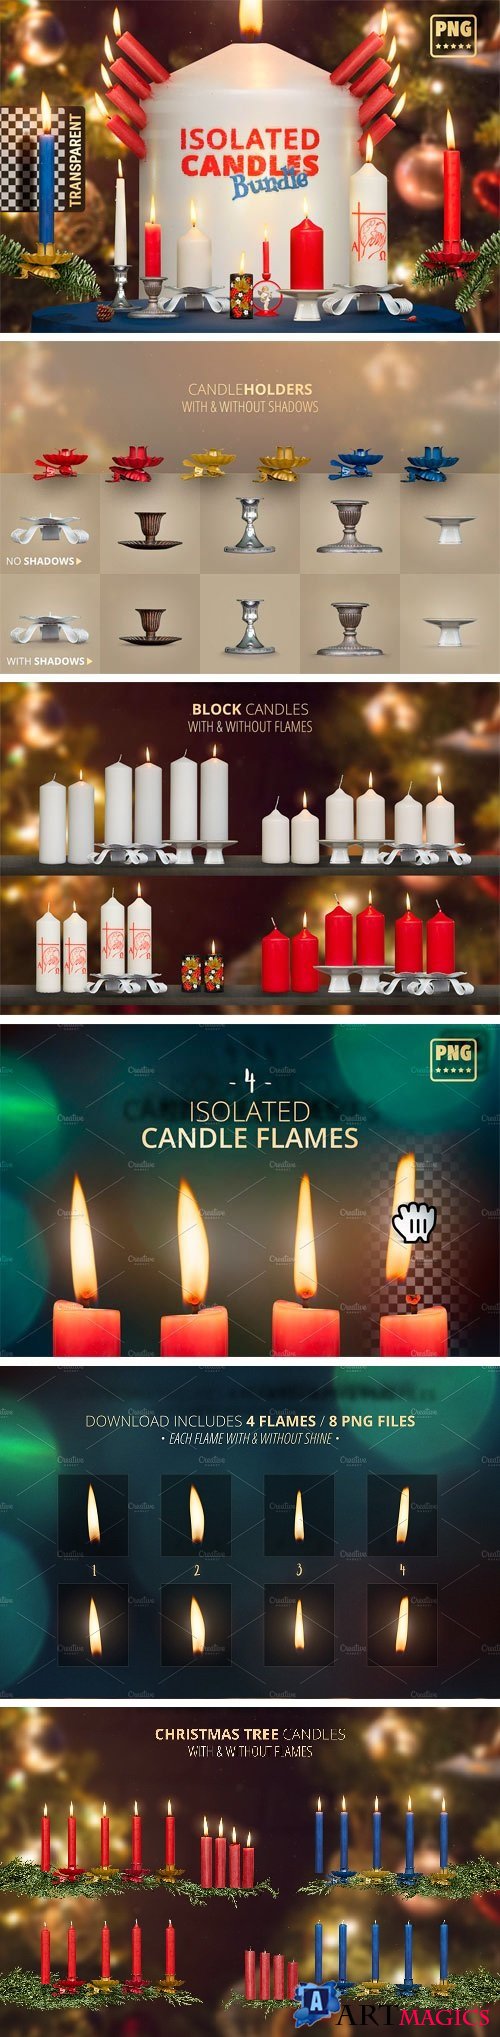 Isolated Candles Bundle with Flames 1989053